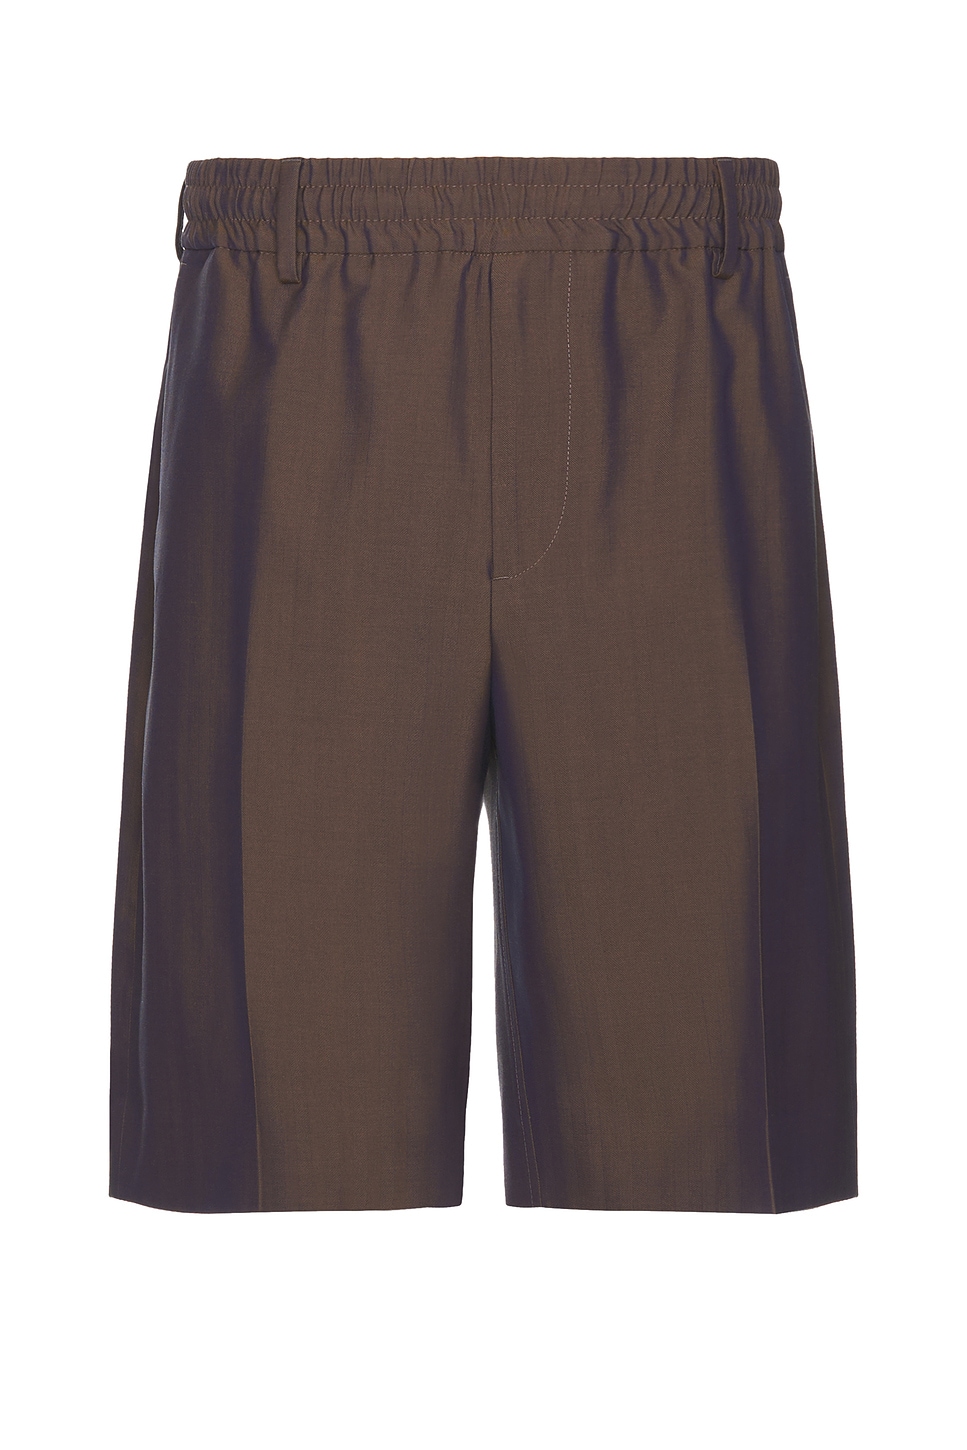 Image 1 of Burberry Pleated Short in Barrel